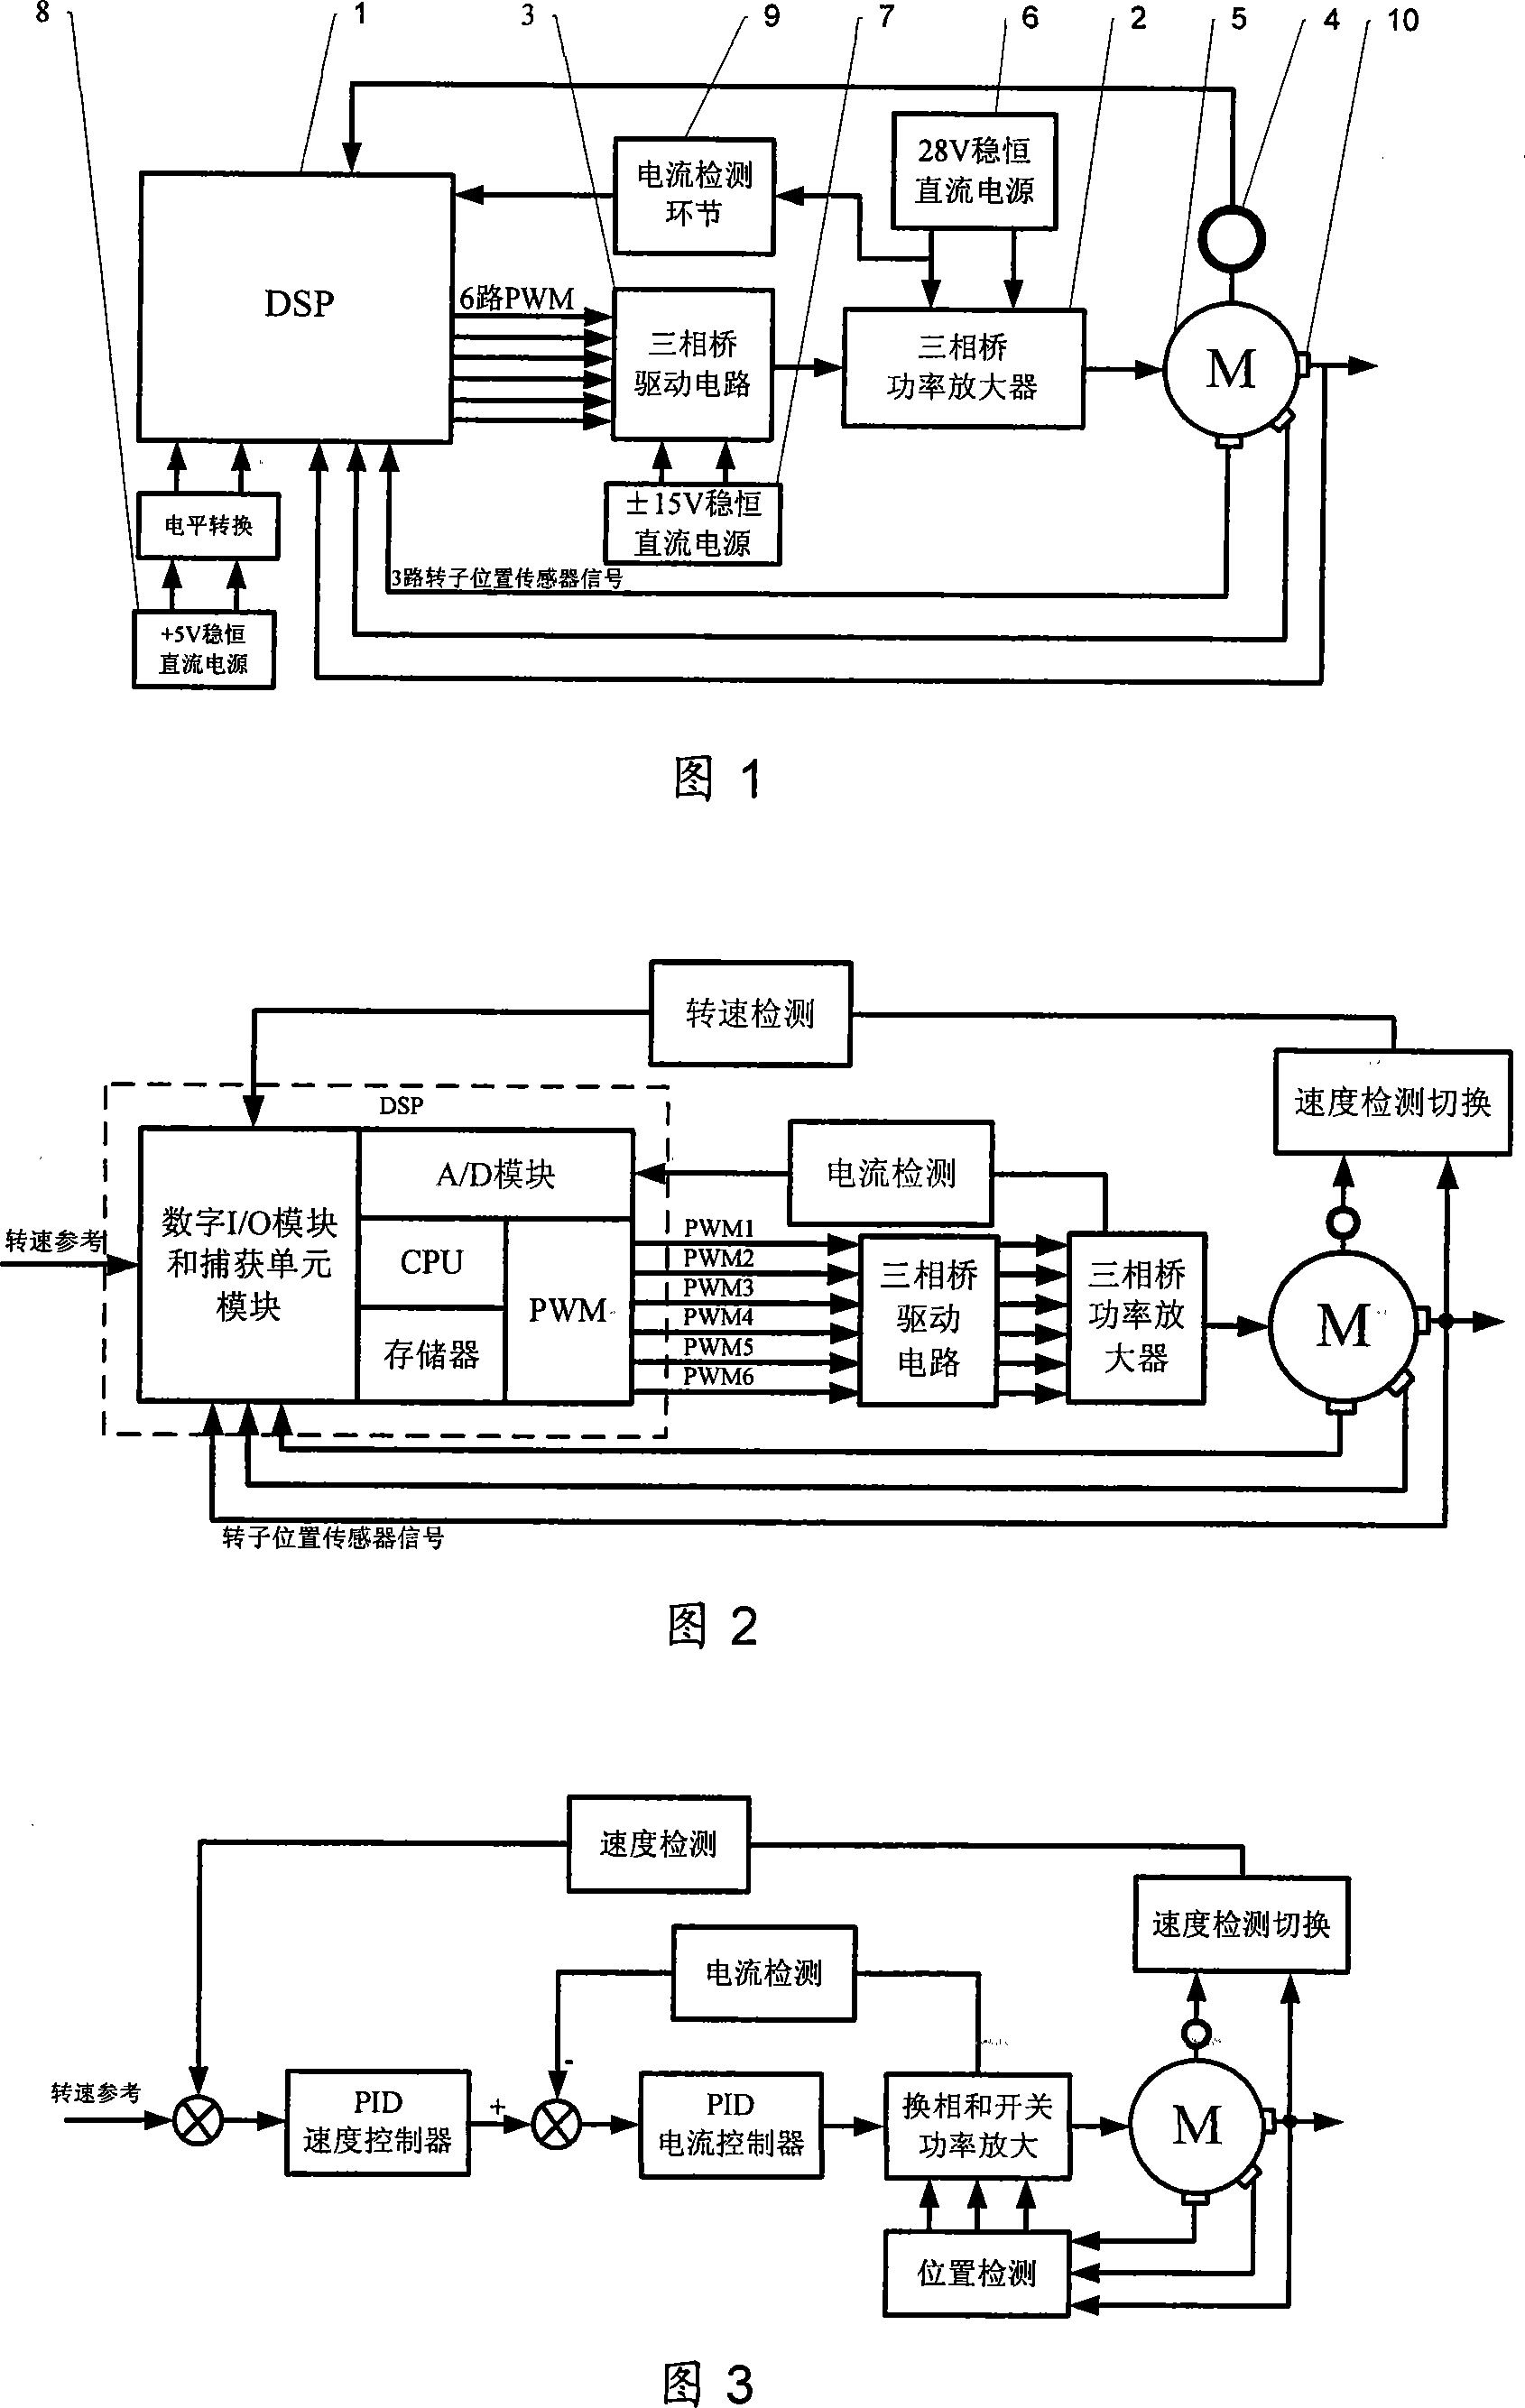 Highly precise speed mode control system for magnetic floating counteractive flywheel electromotor